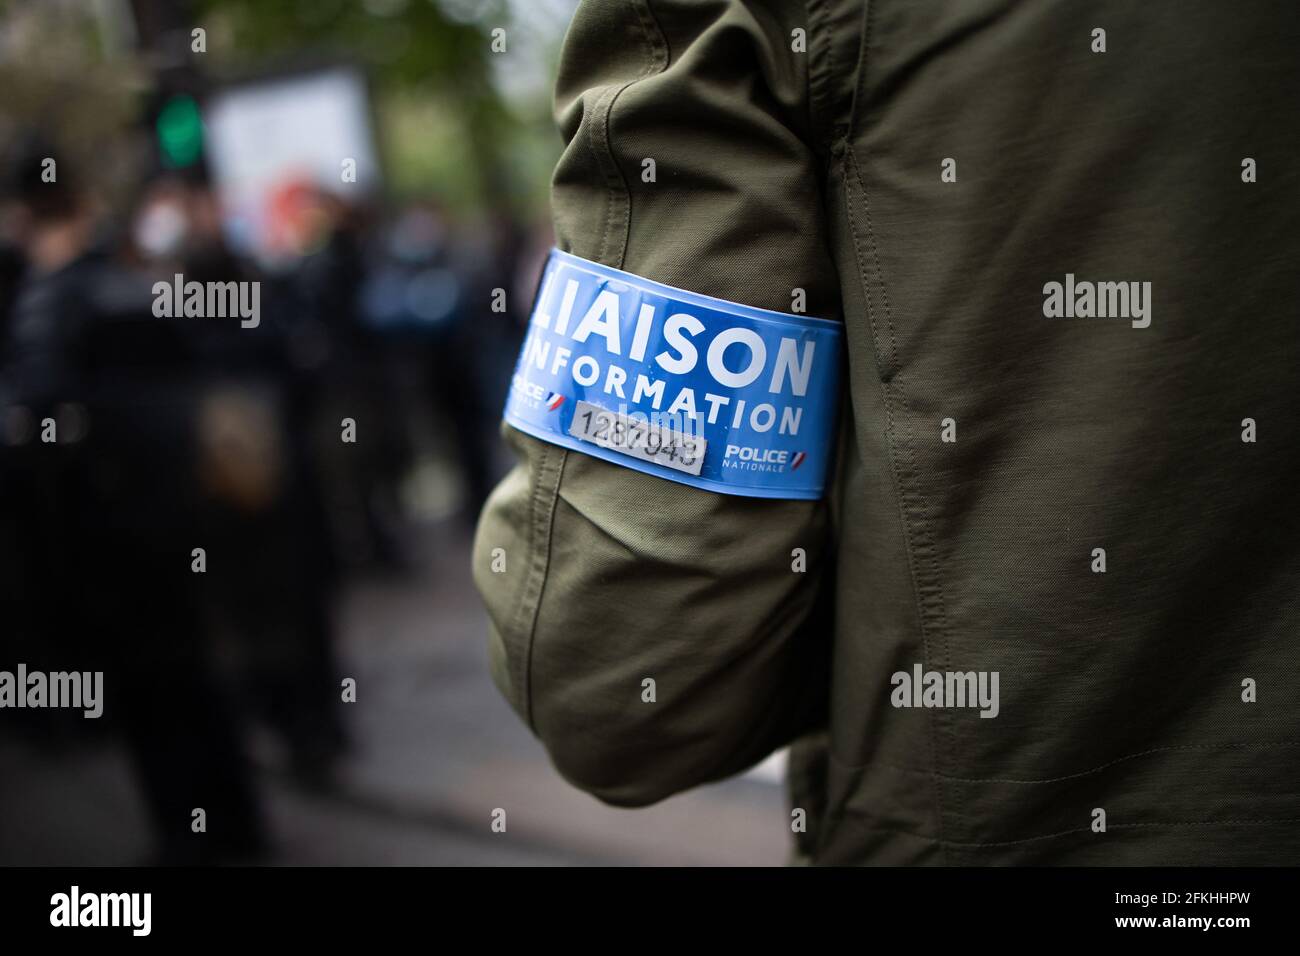 - Alamy Police hi-res photography images stock armband and